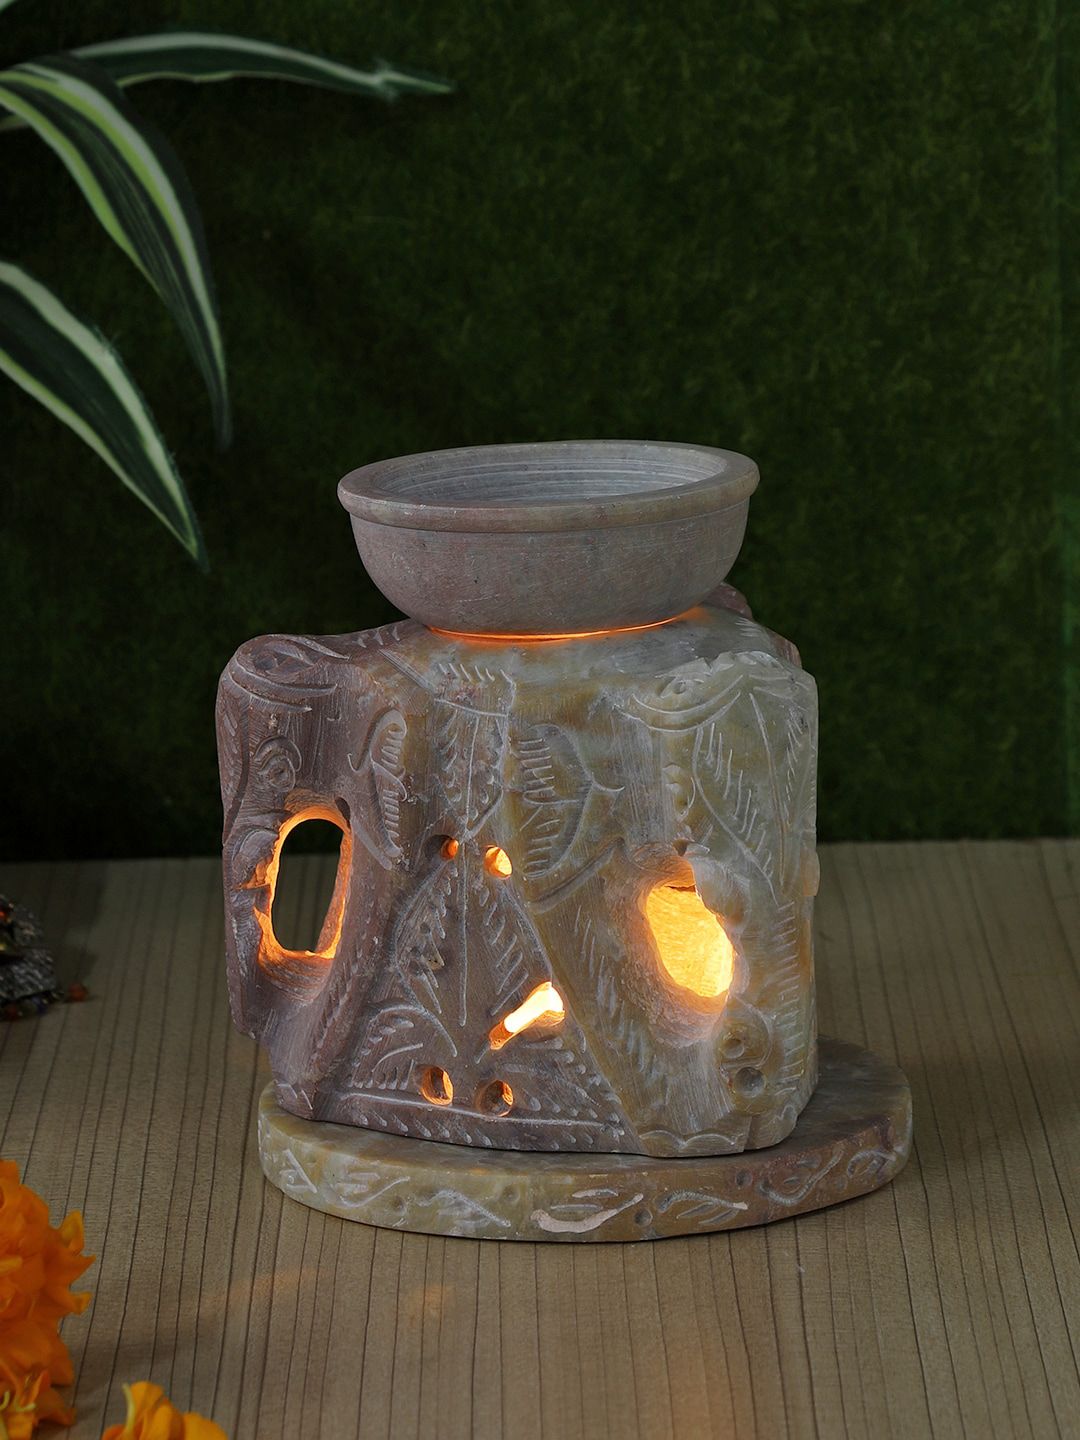 Aapno Rajasthan Cream Coloured Elephant Shaped Tealight Holder With Aroma Oil Diffusers Price in India